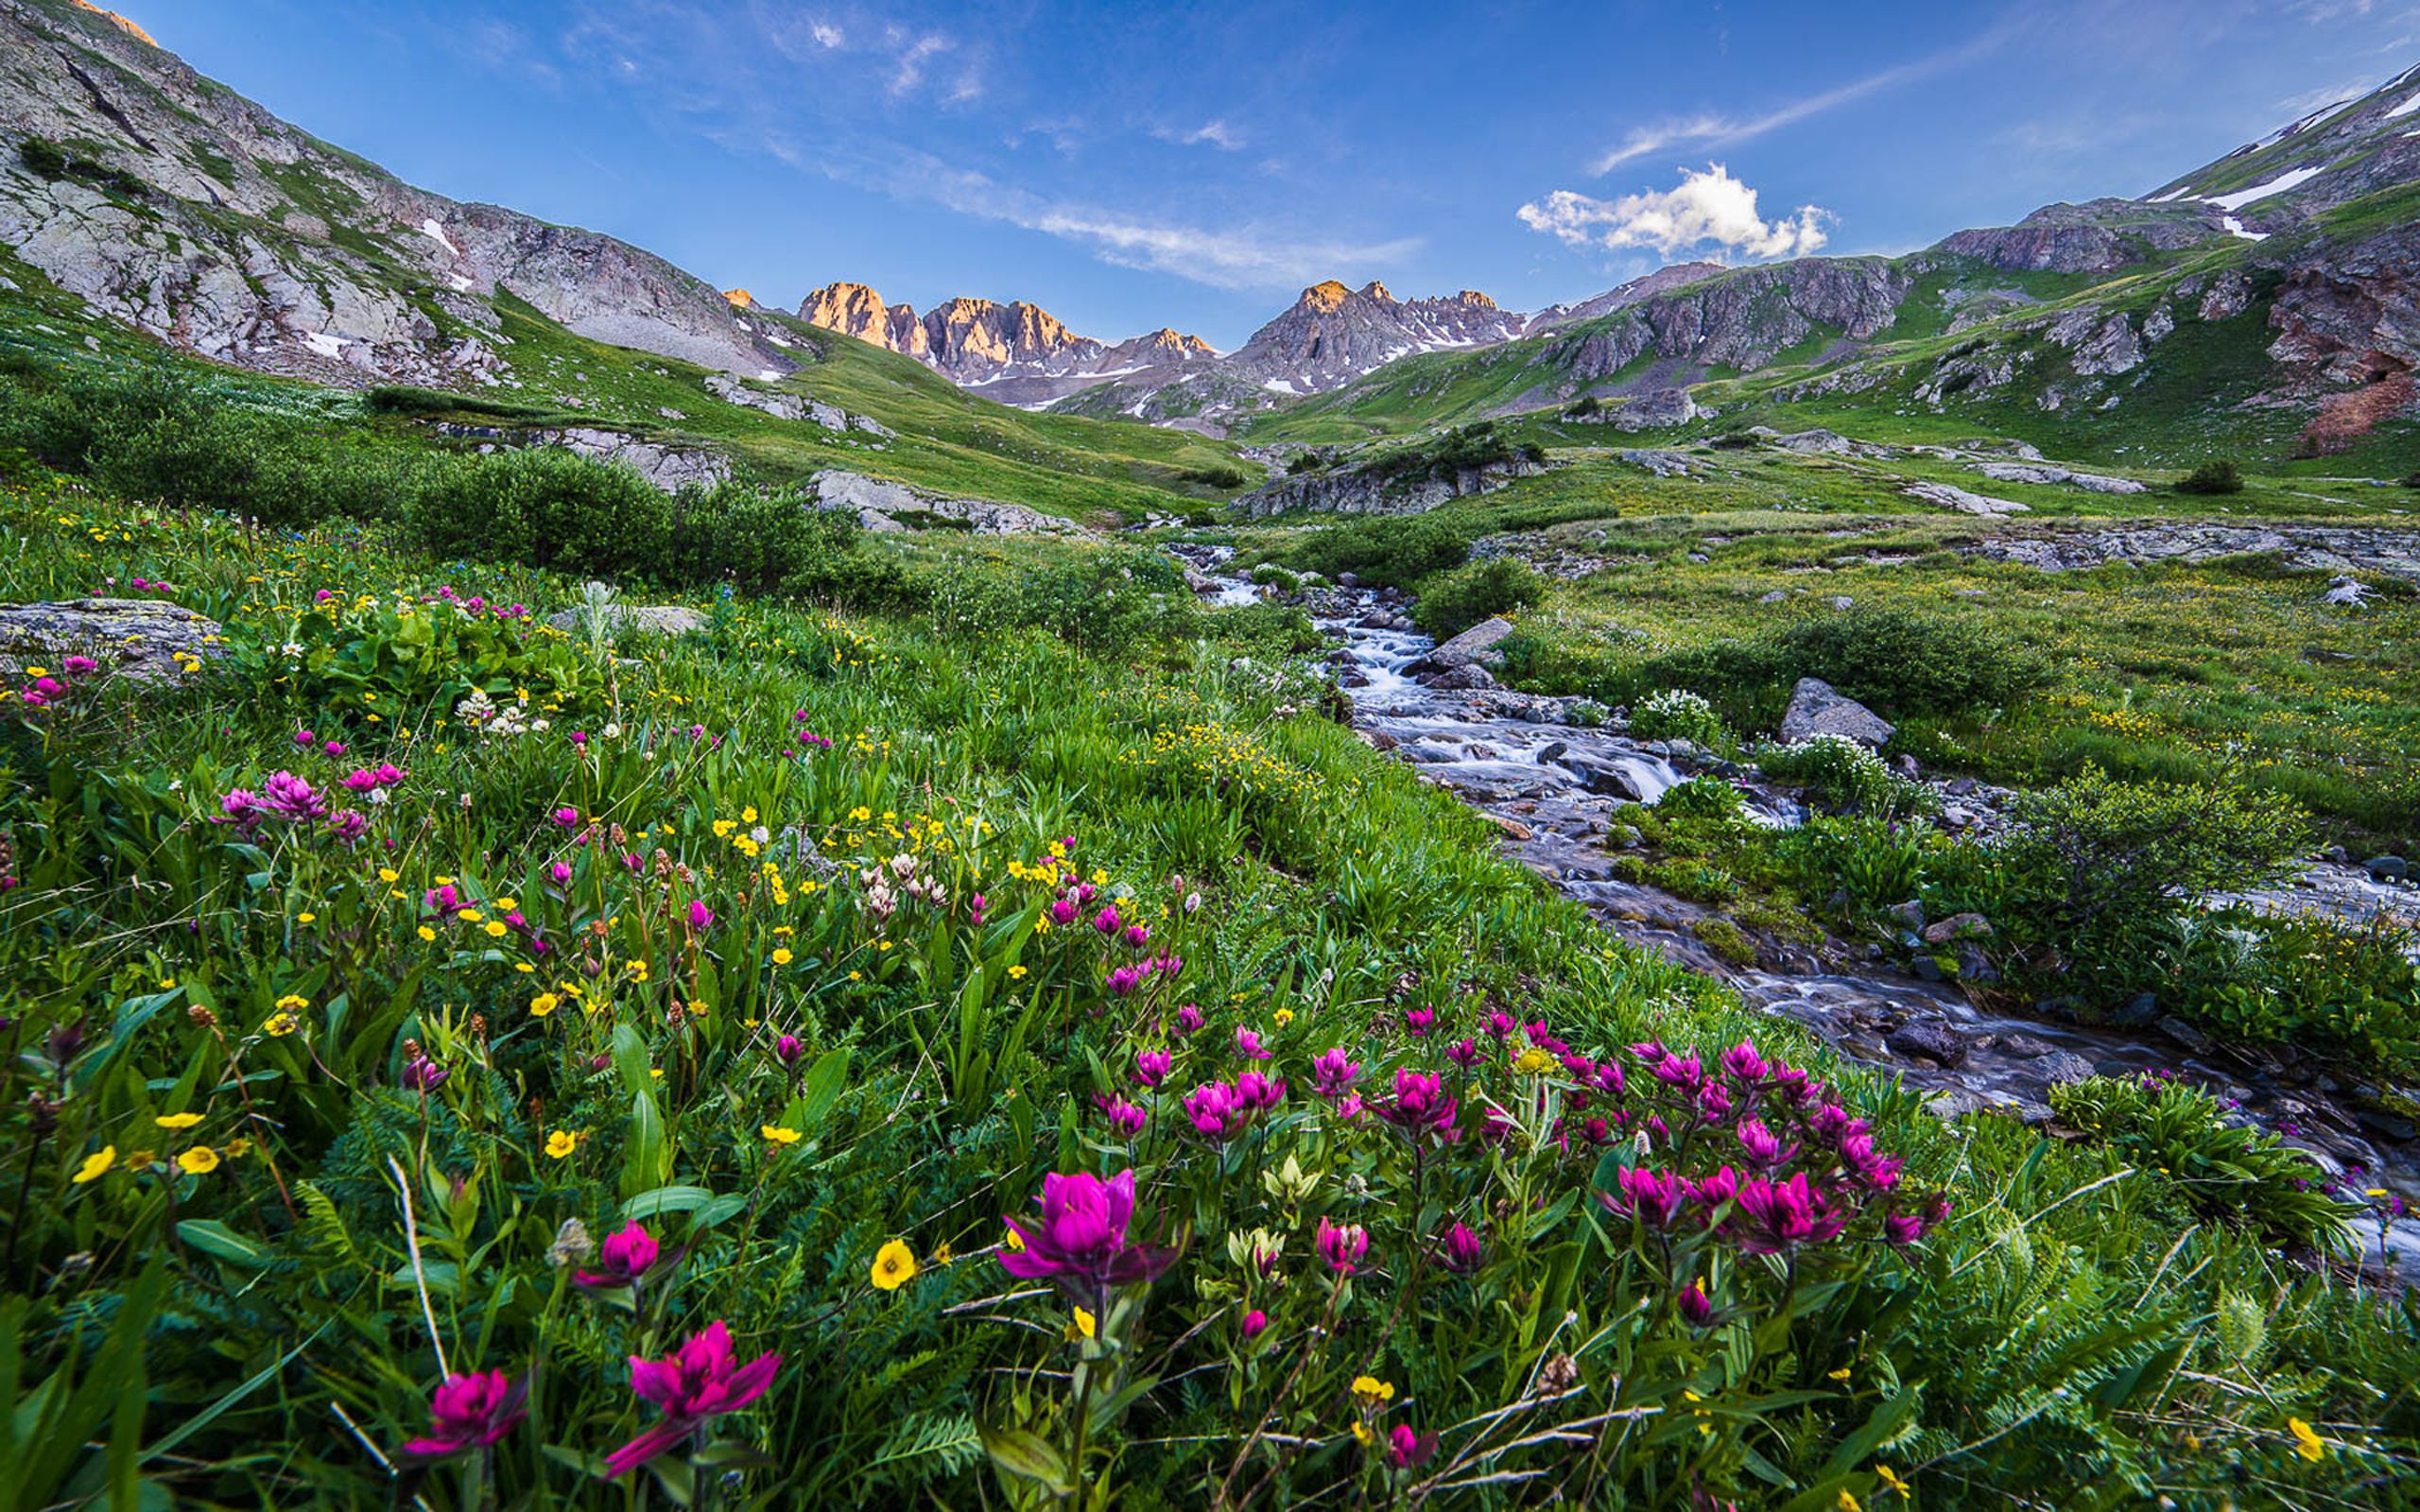 Landscape Beautiful Scenery Rocky Peaks Stream Meadow With Colorful Mountain Flowers Blue Sky Spring In Colorado HD Wallpaper For Mobile Phones Tablet And Pc 2560x1600, Wallpaper13.com